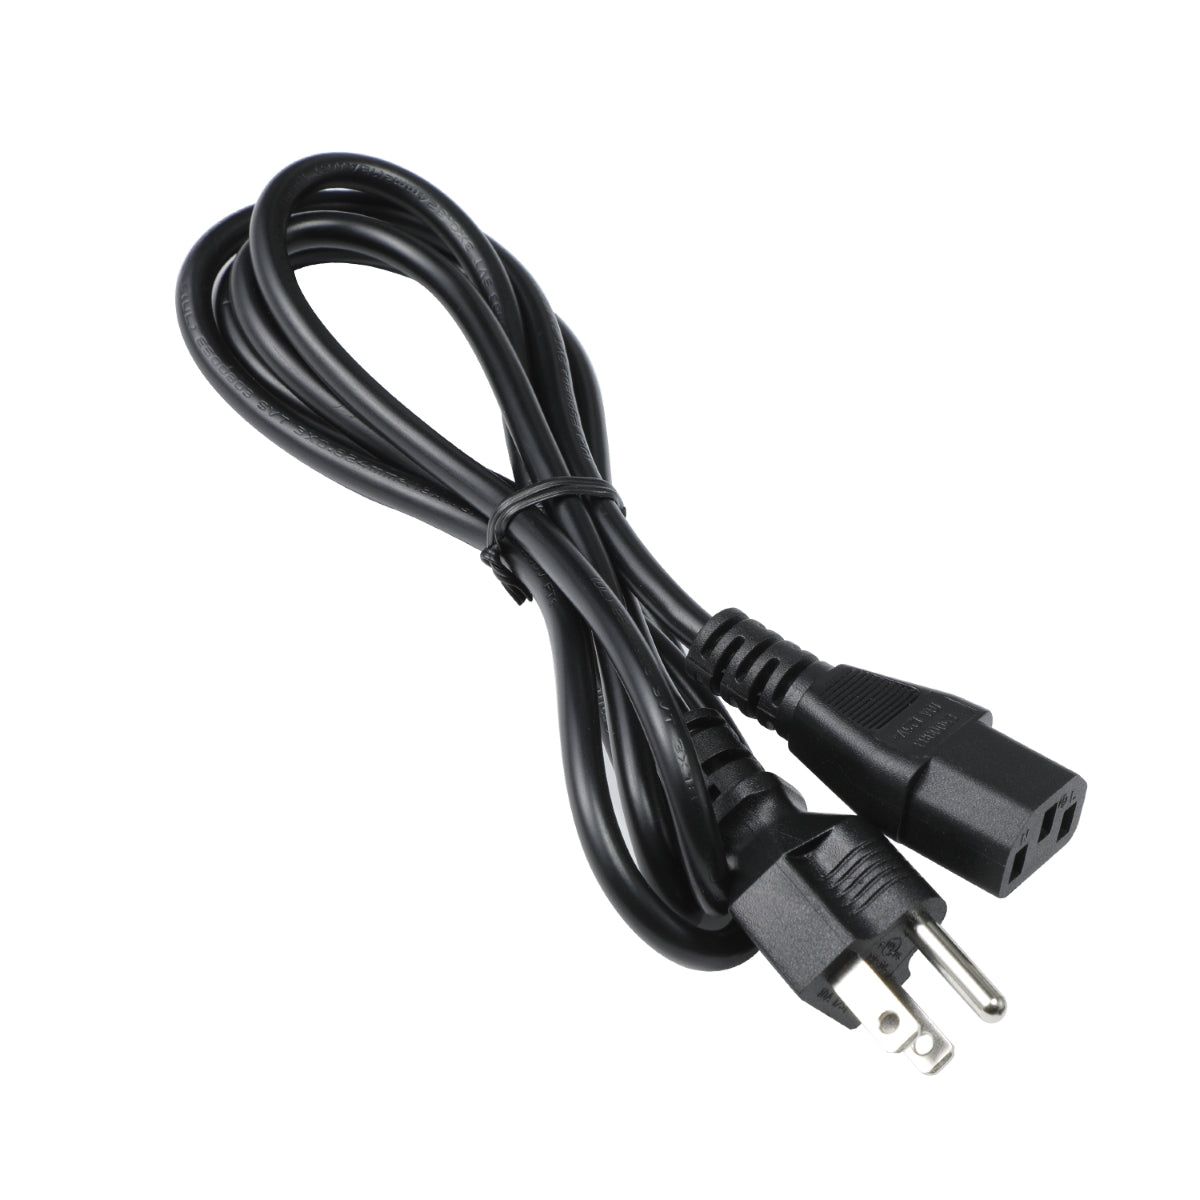 Power Cord for Samsung LC49J890DKNXZA Monitor TV.